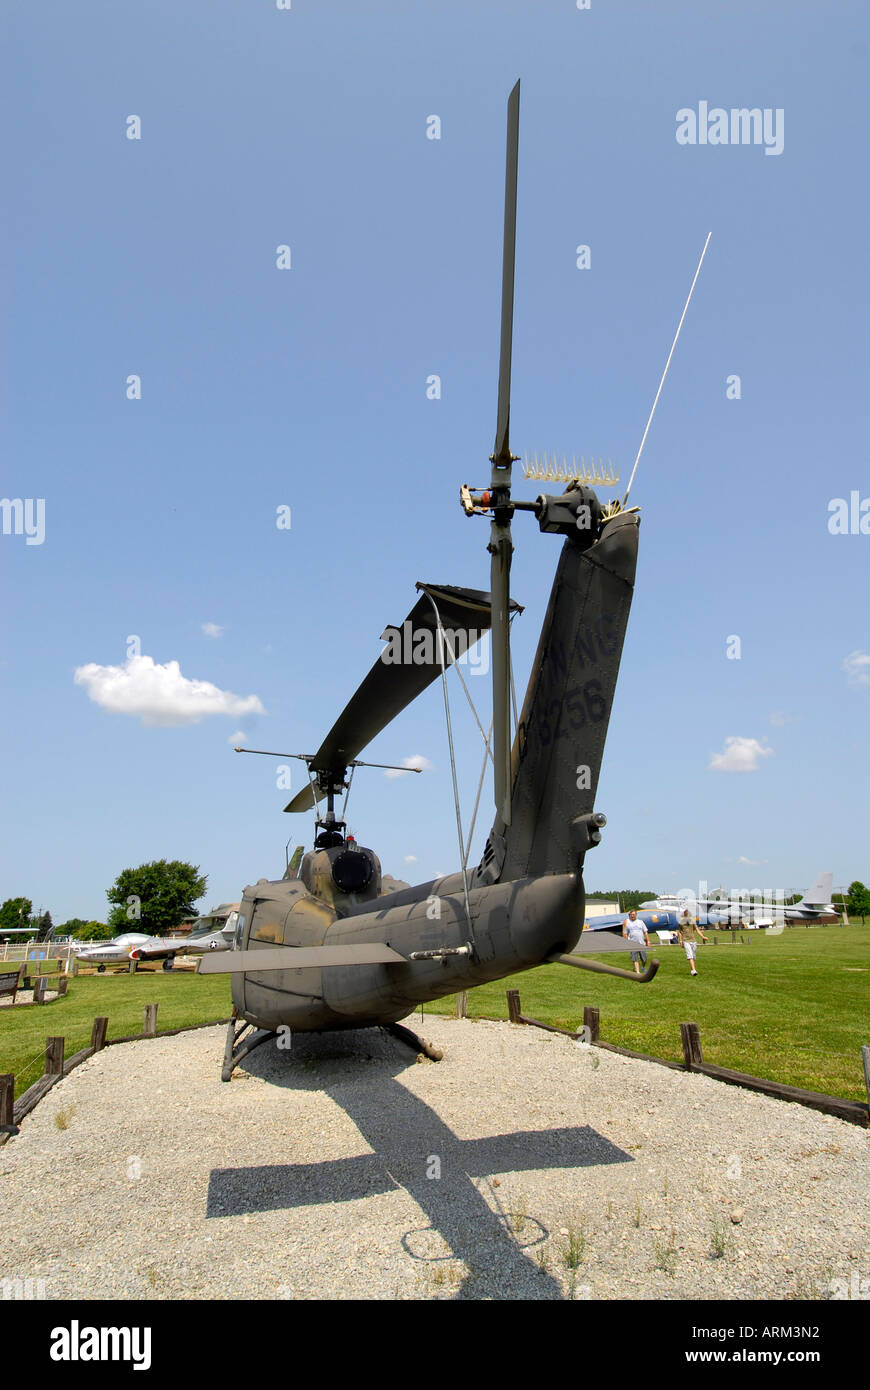 Bell UH 1H Huey helicopter at the Grissom Air Museum outside of Grissom Air Force Base Indiana IN Stock Photo